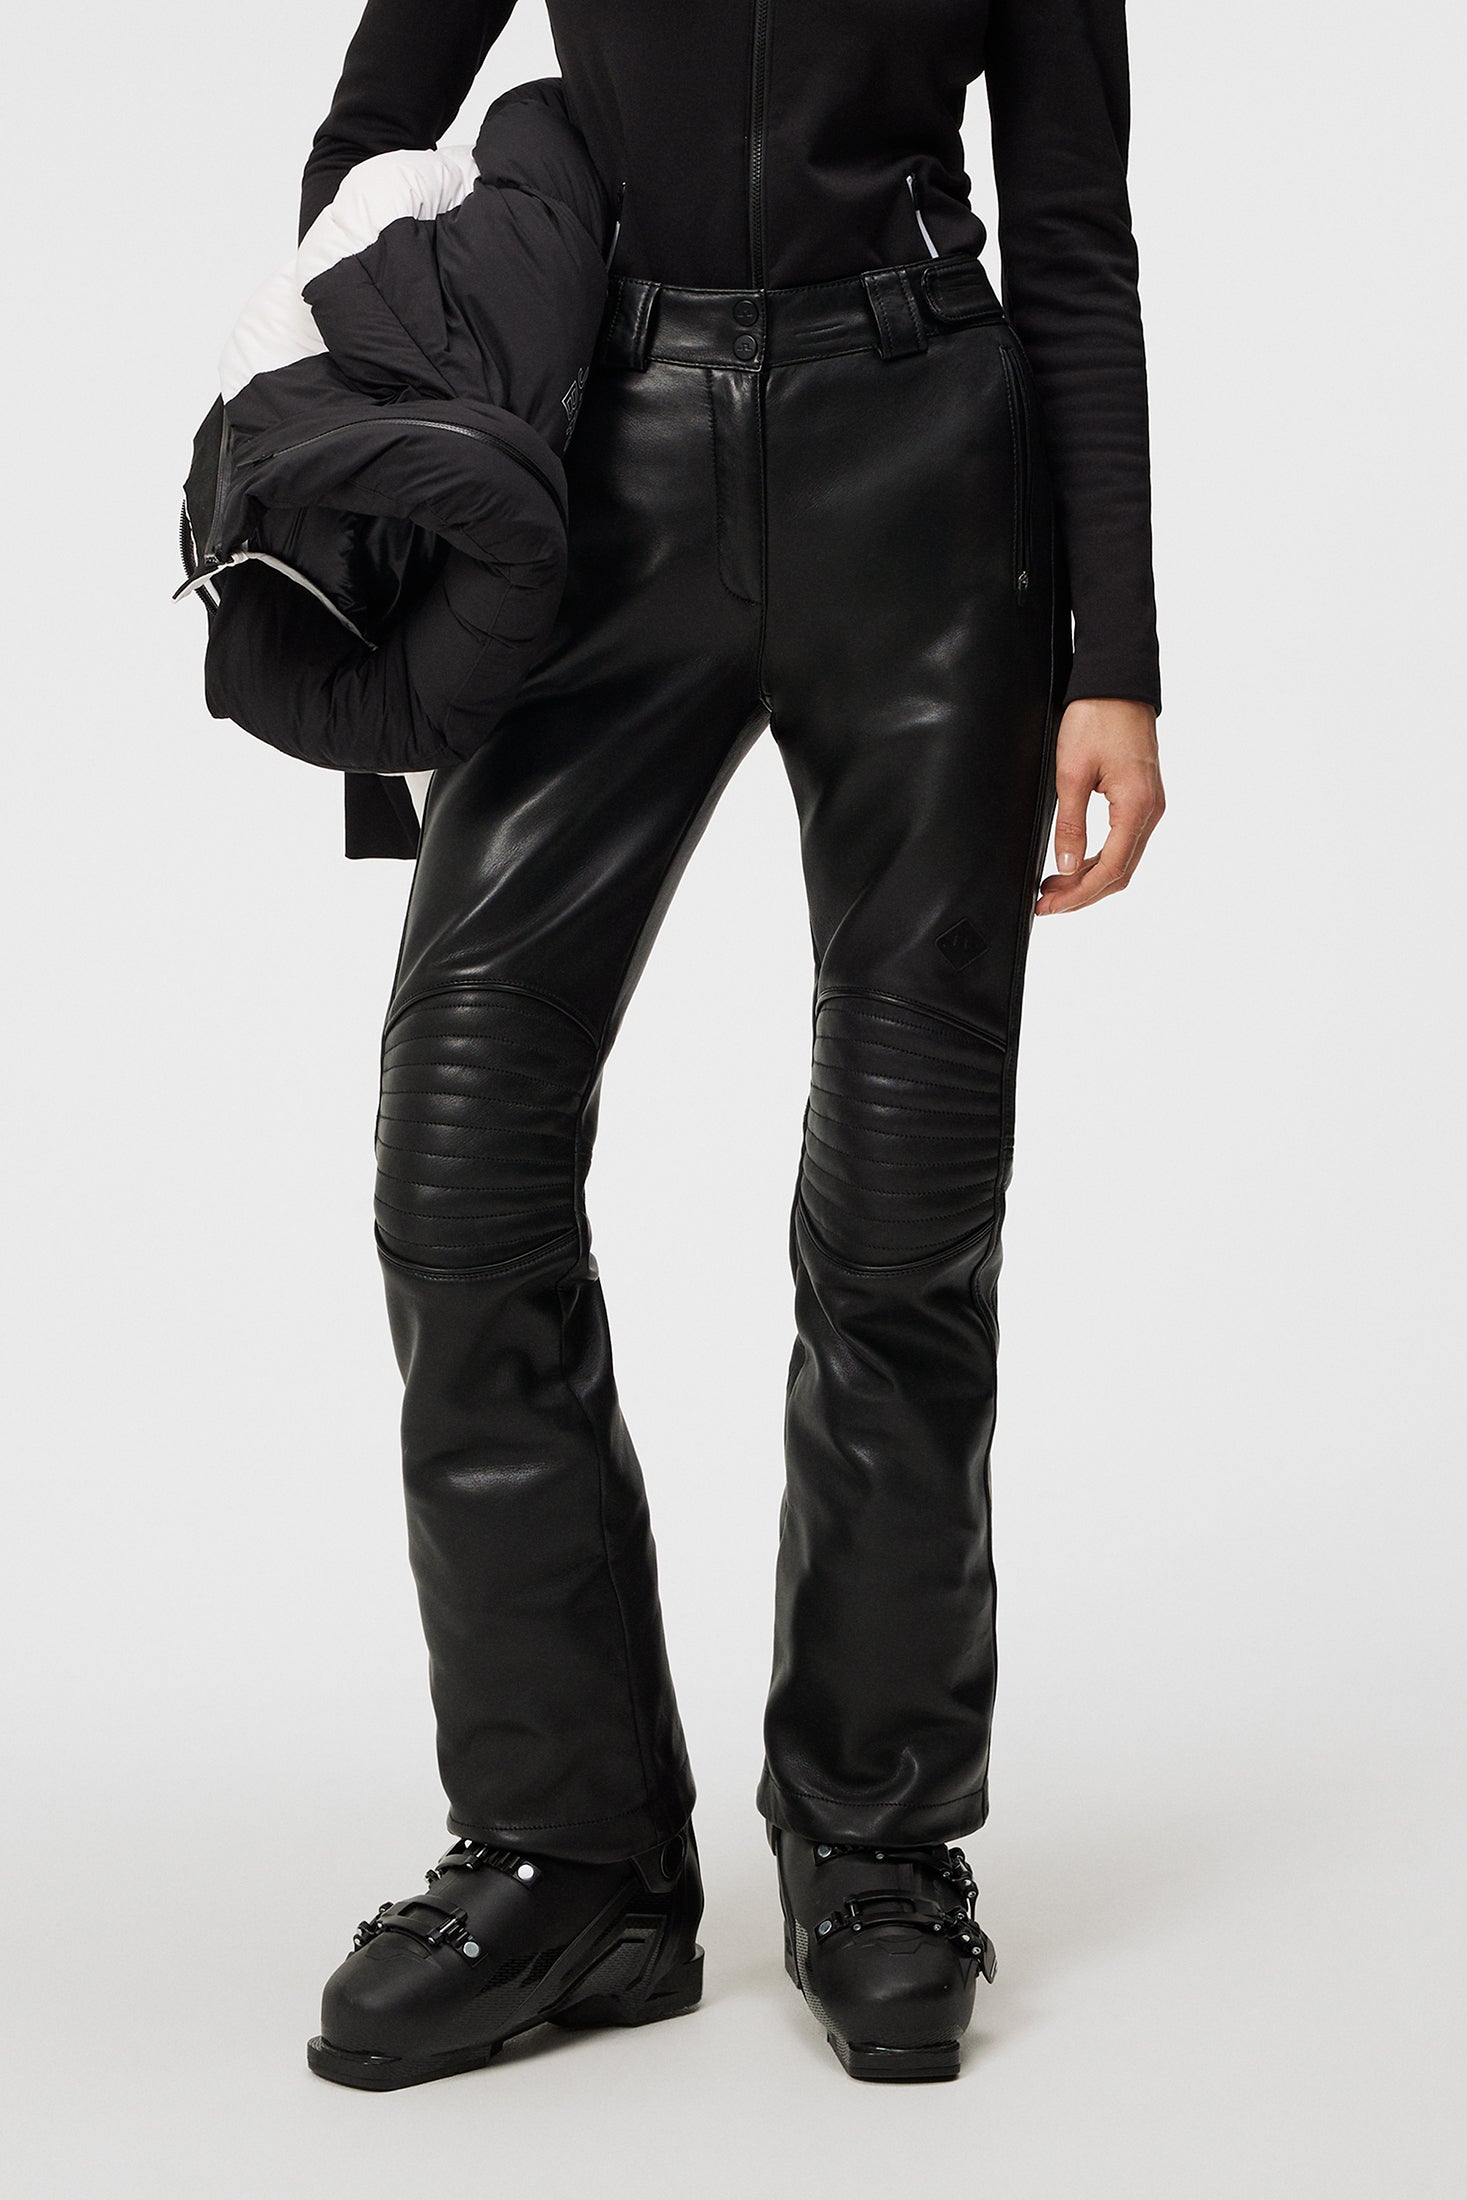 Stanford Leather Pant